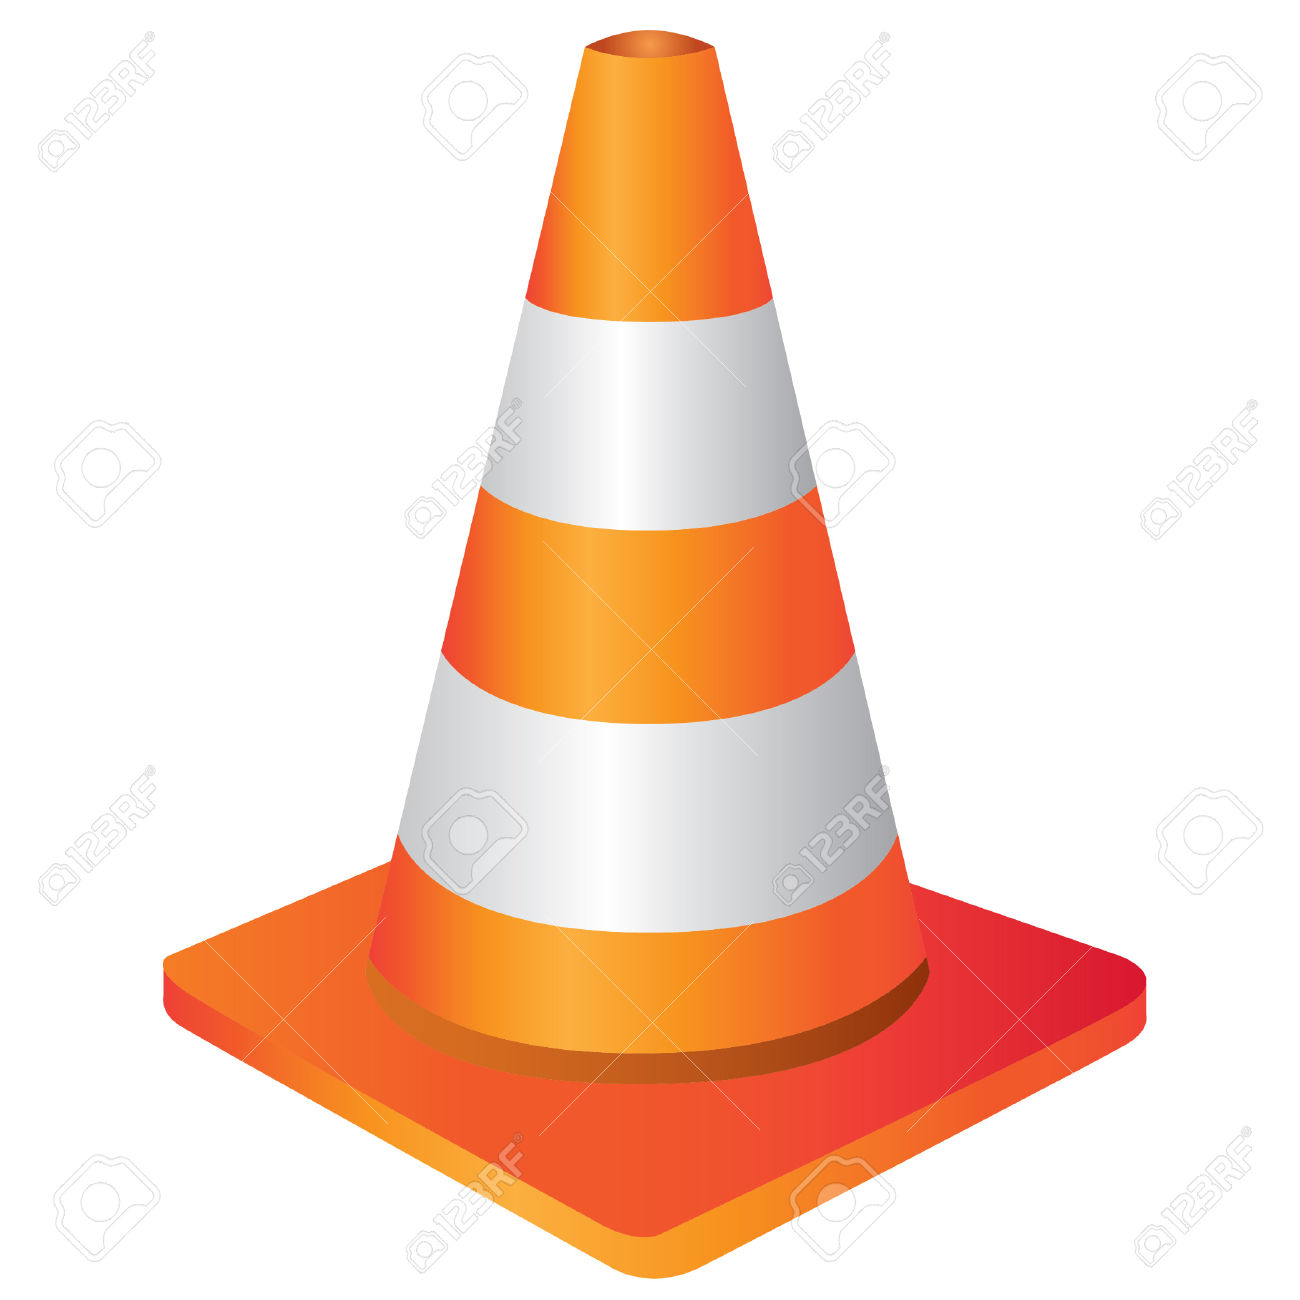 cone clipart construction sign